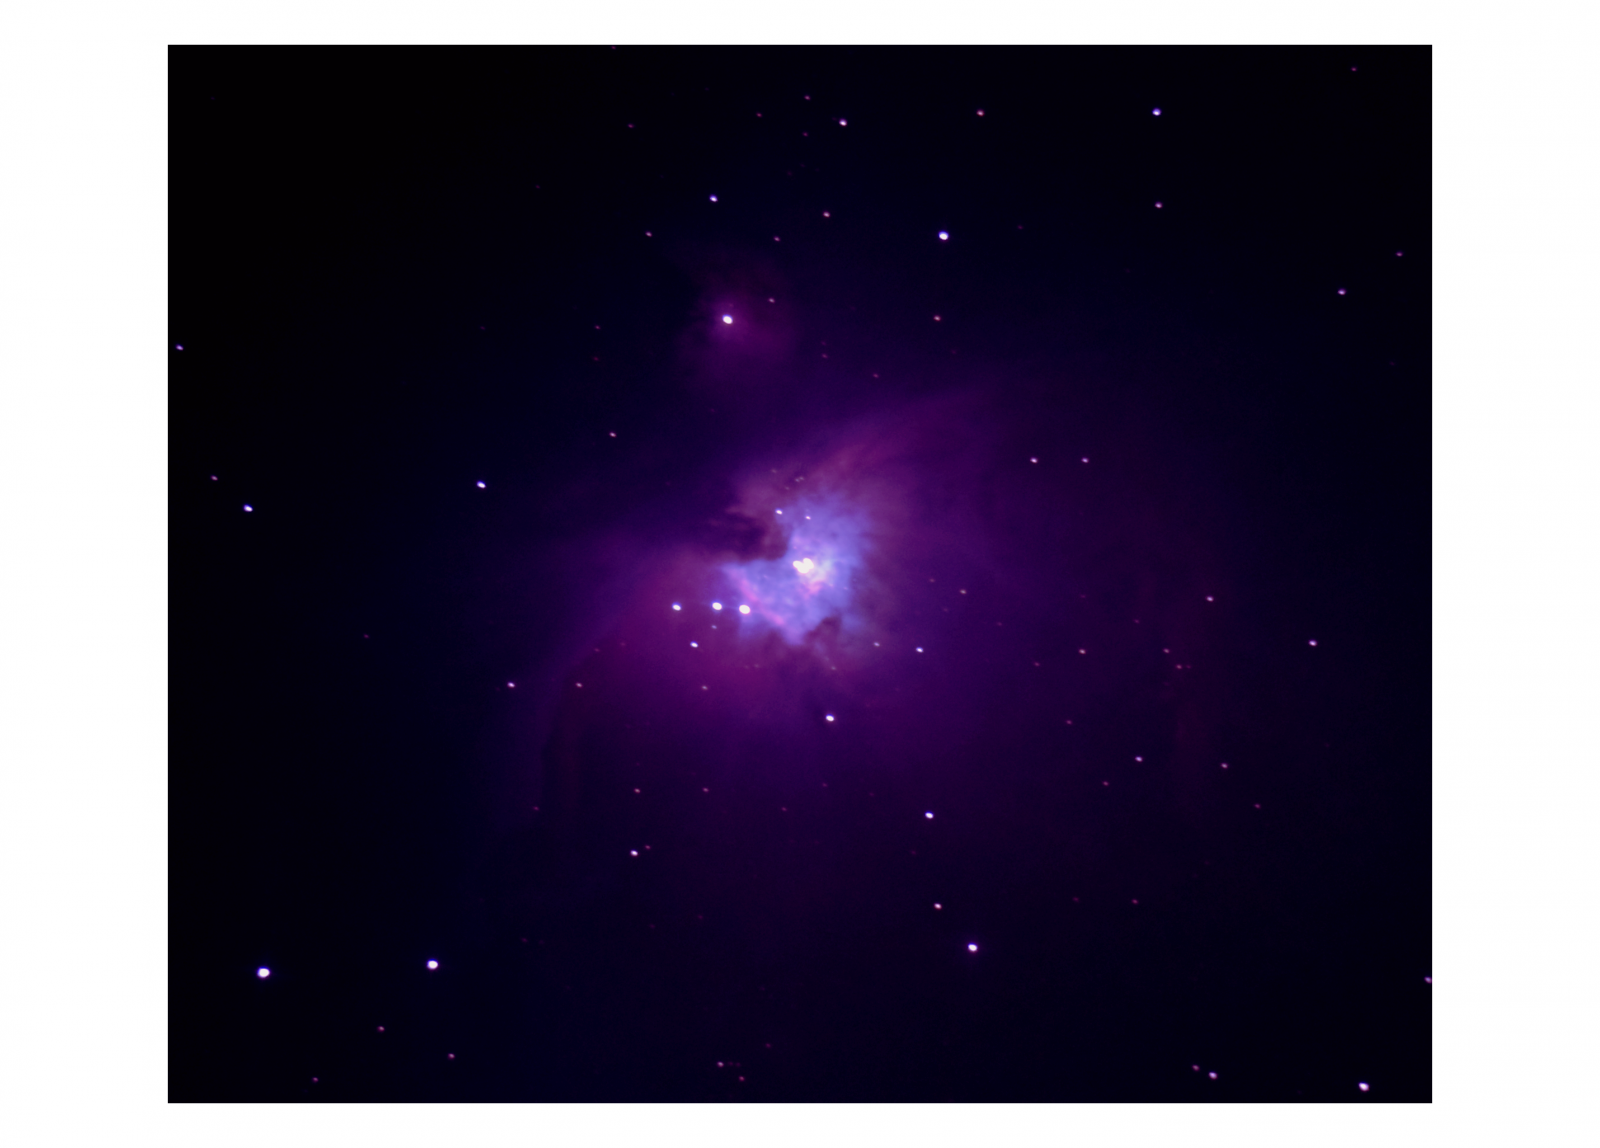 M42 16/02/2013 (bad focus) 1st rushed attempt with new setup